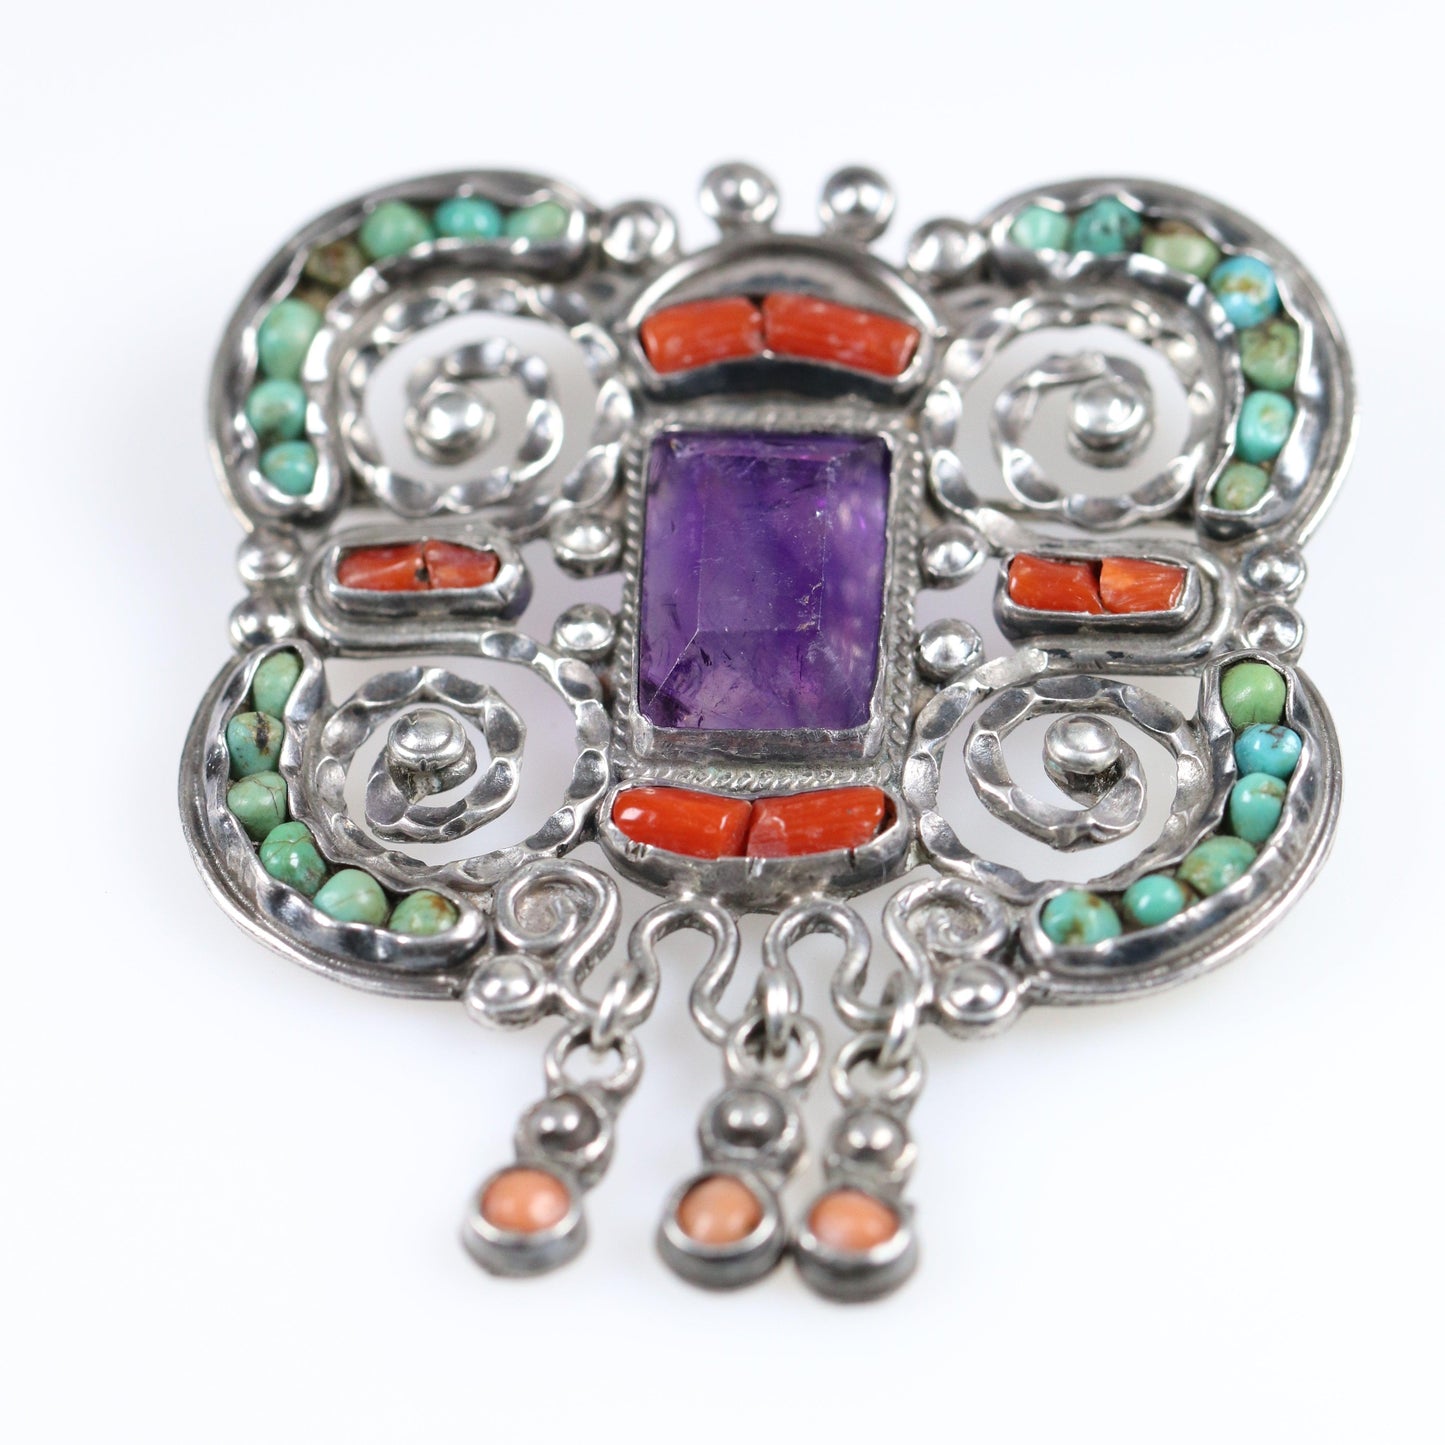 MATL Brooch | Ricardo Salas Amethyst, Coral, Tourquoise Pin | Vintage Sterling Silver Mexico - Carmel Fine Silver Jewelry